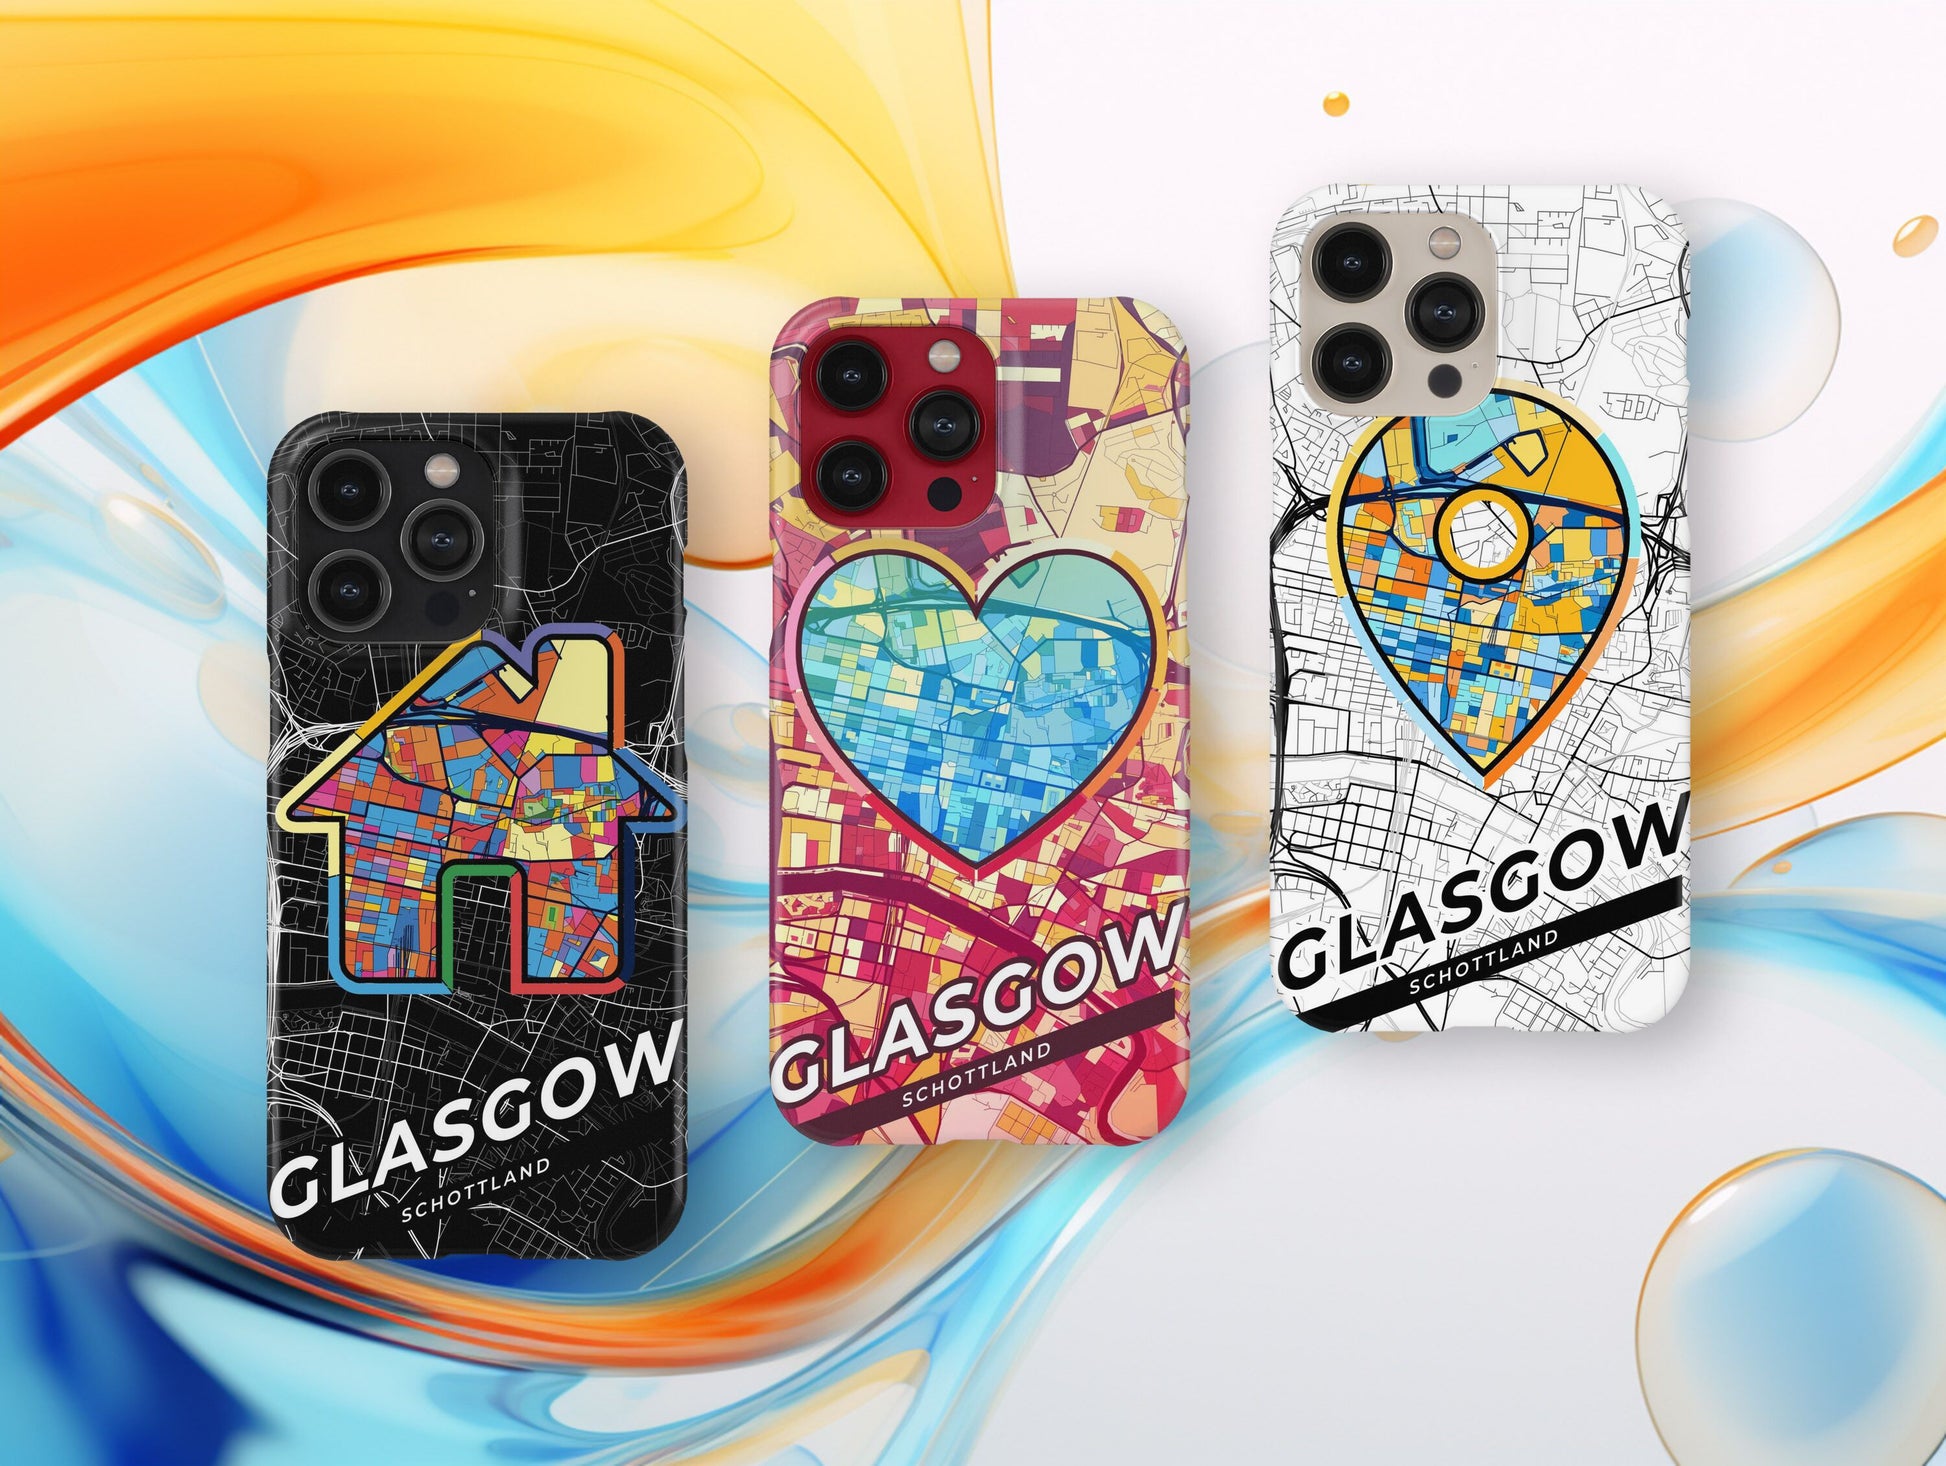 Glasgow Scotland slim phone case with colorful icon. Birthday, wedding or housewarming gift. Couple match cases.